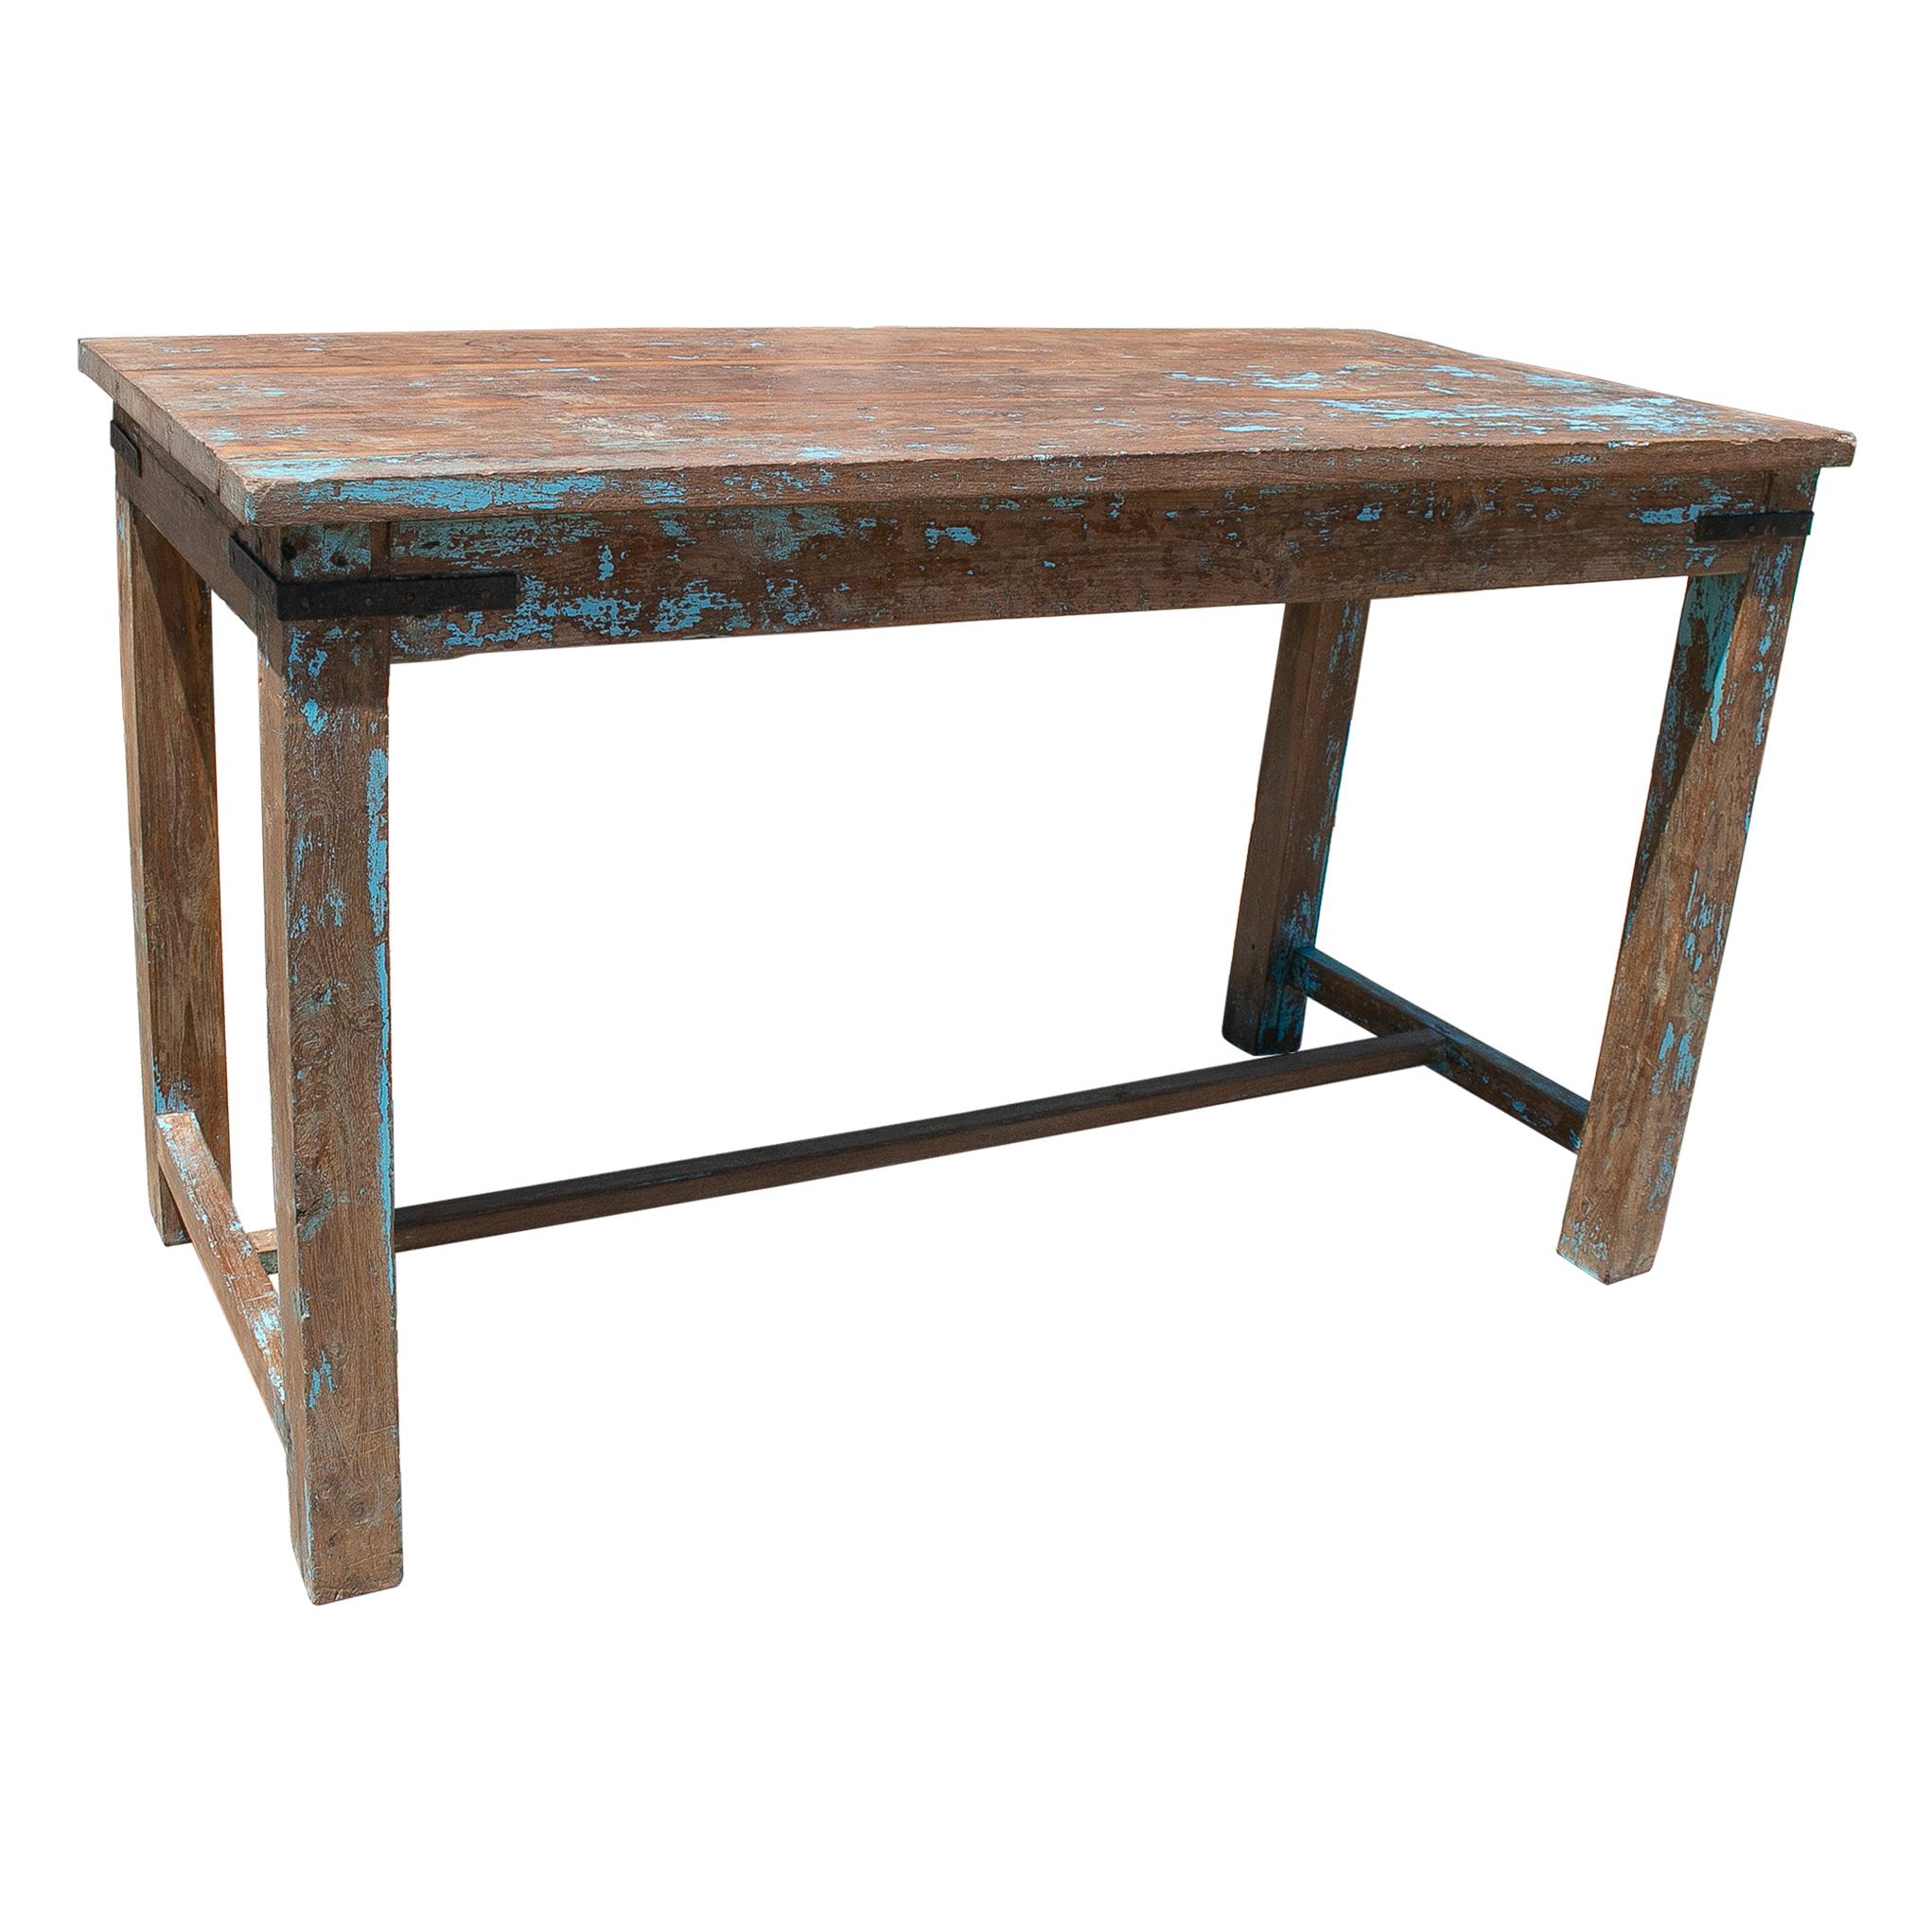 1970s Spanish Washed Wood Farmhouse Table w/ Crossbeam